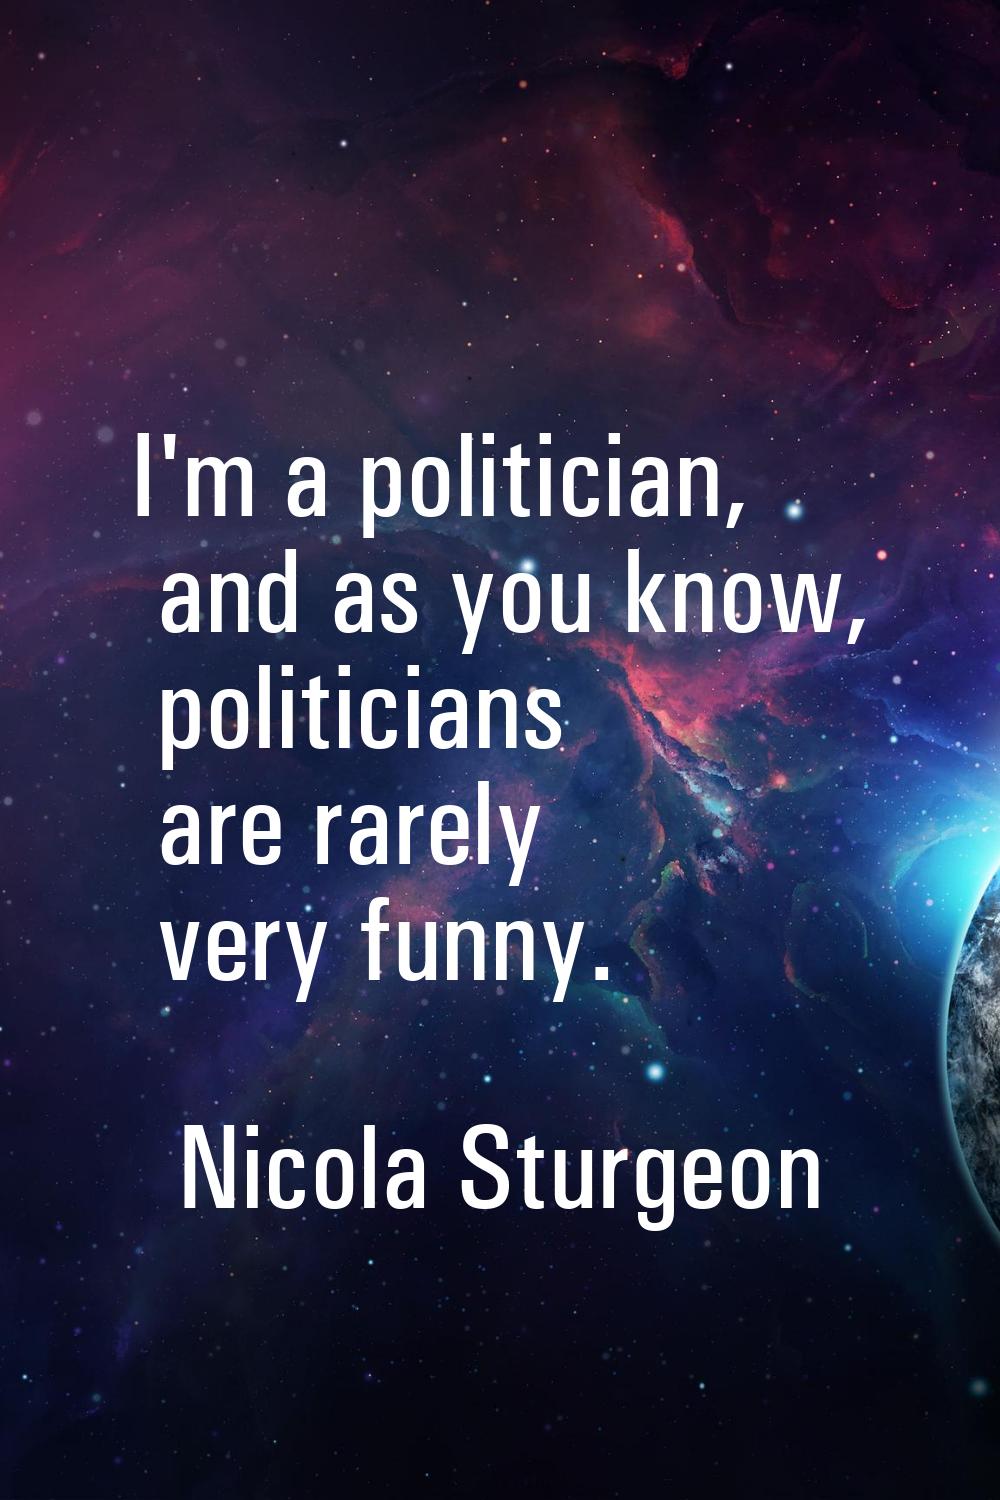 I'm a politician, and as you know, politicians are rarely very funny.